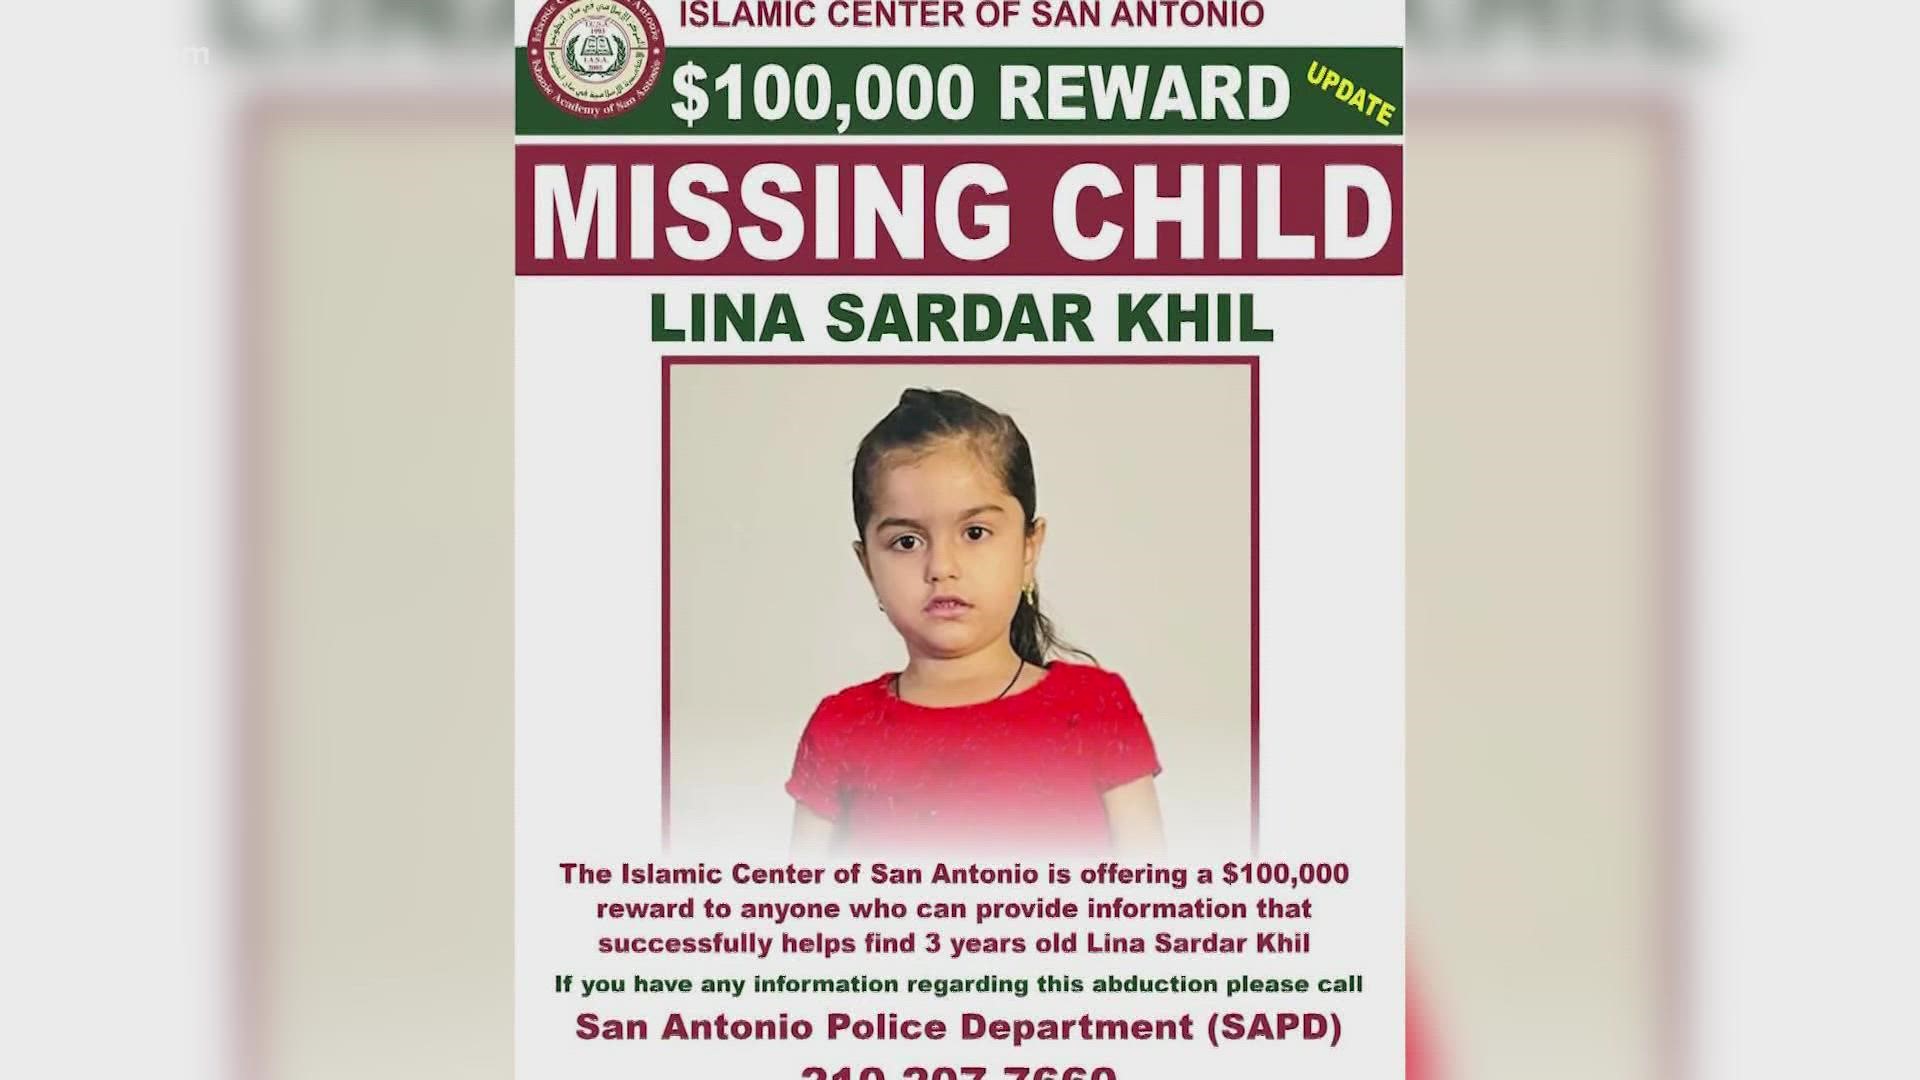 The AMBER alert continues for Lina Sardar Khil, who was last seen 5 p.m. December 20th at the Villas Del Cabo apartments in San Antonio.